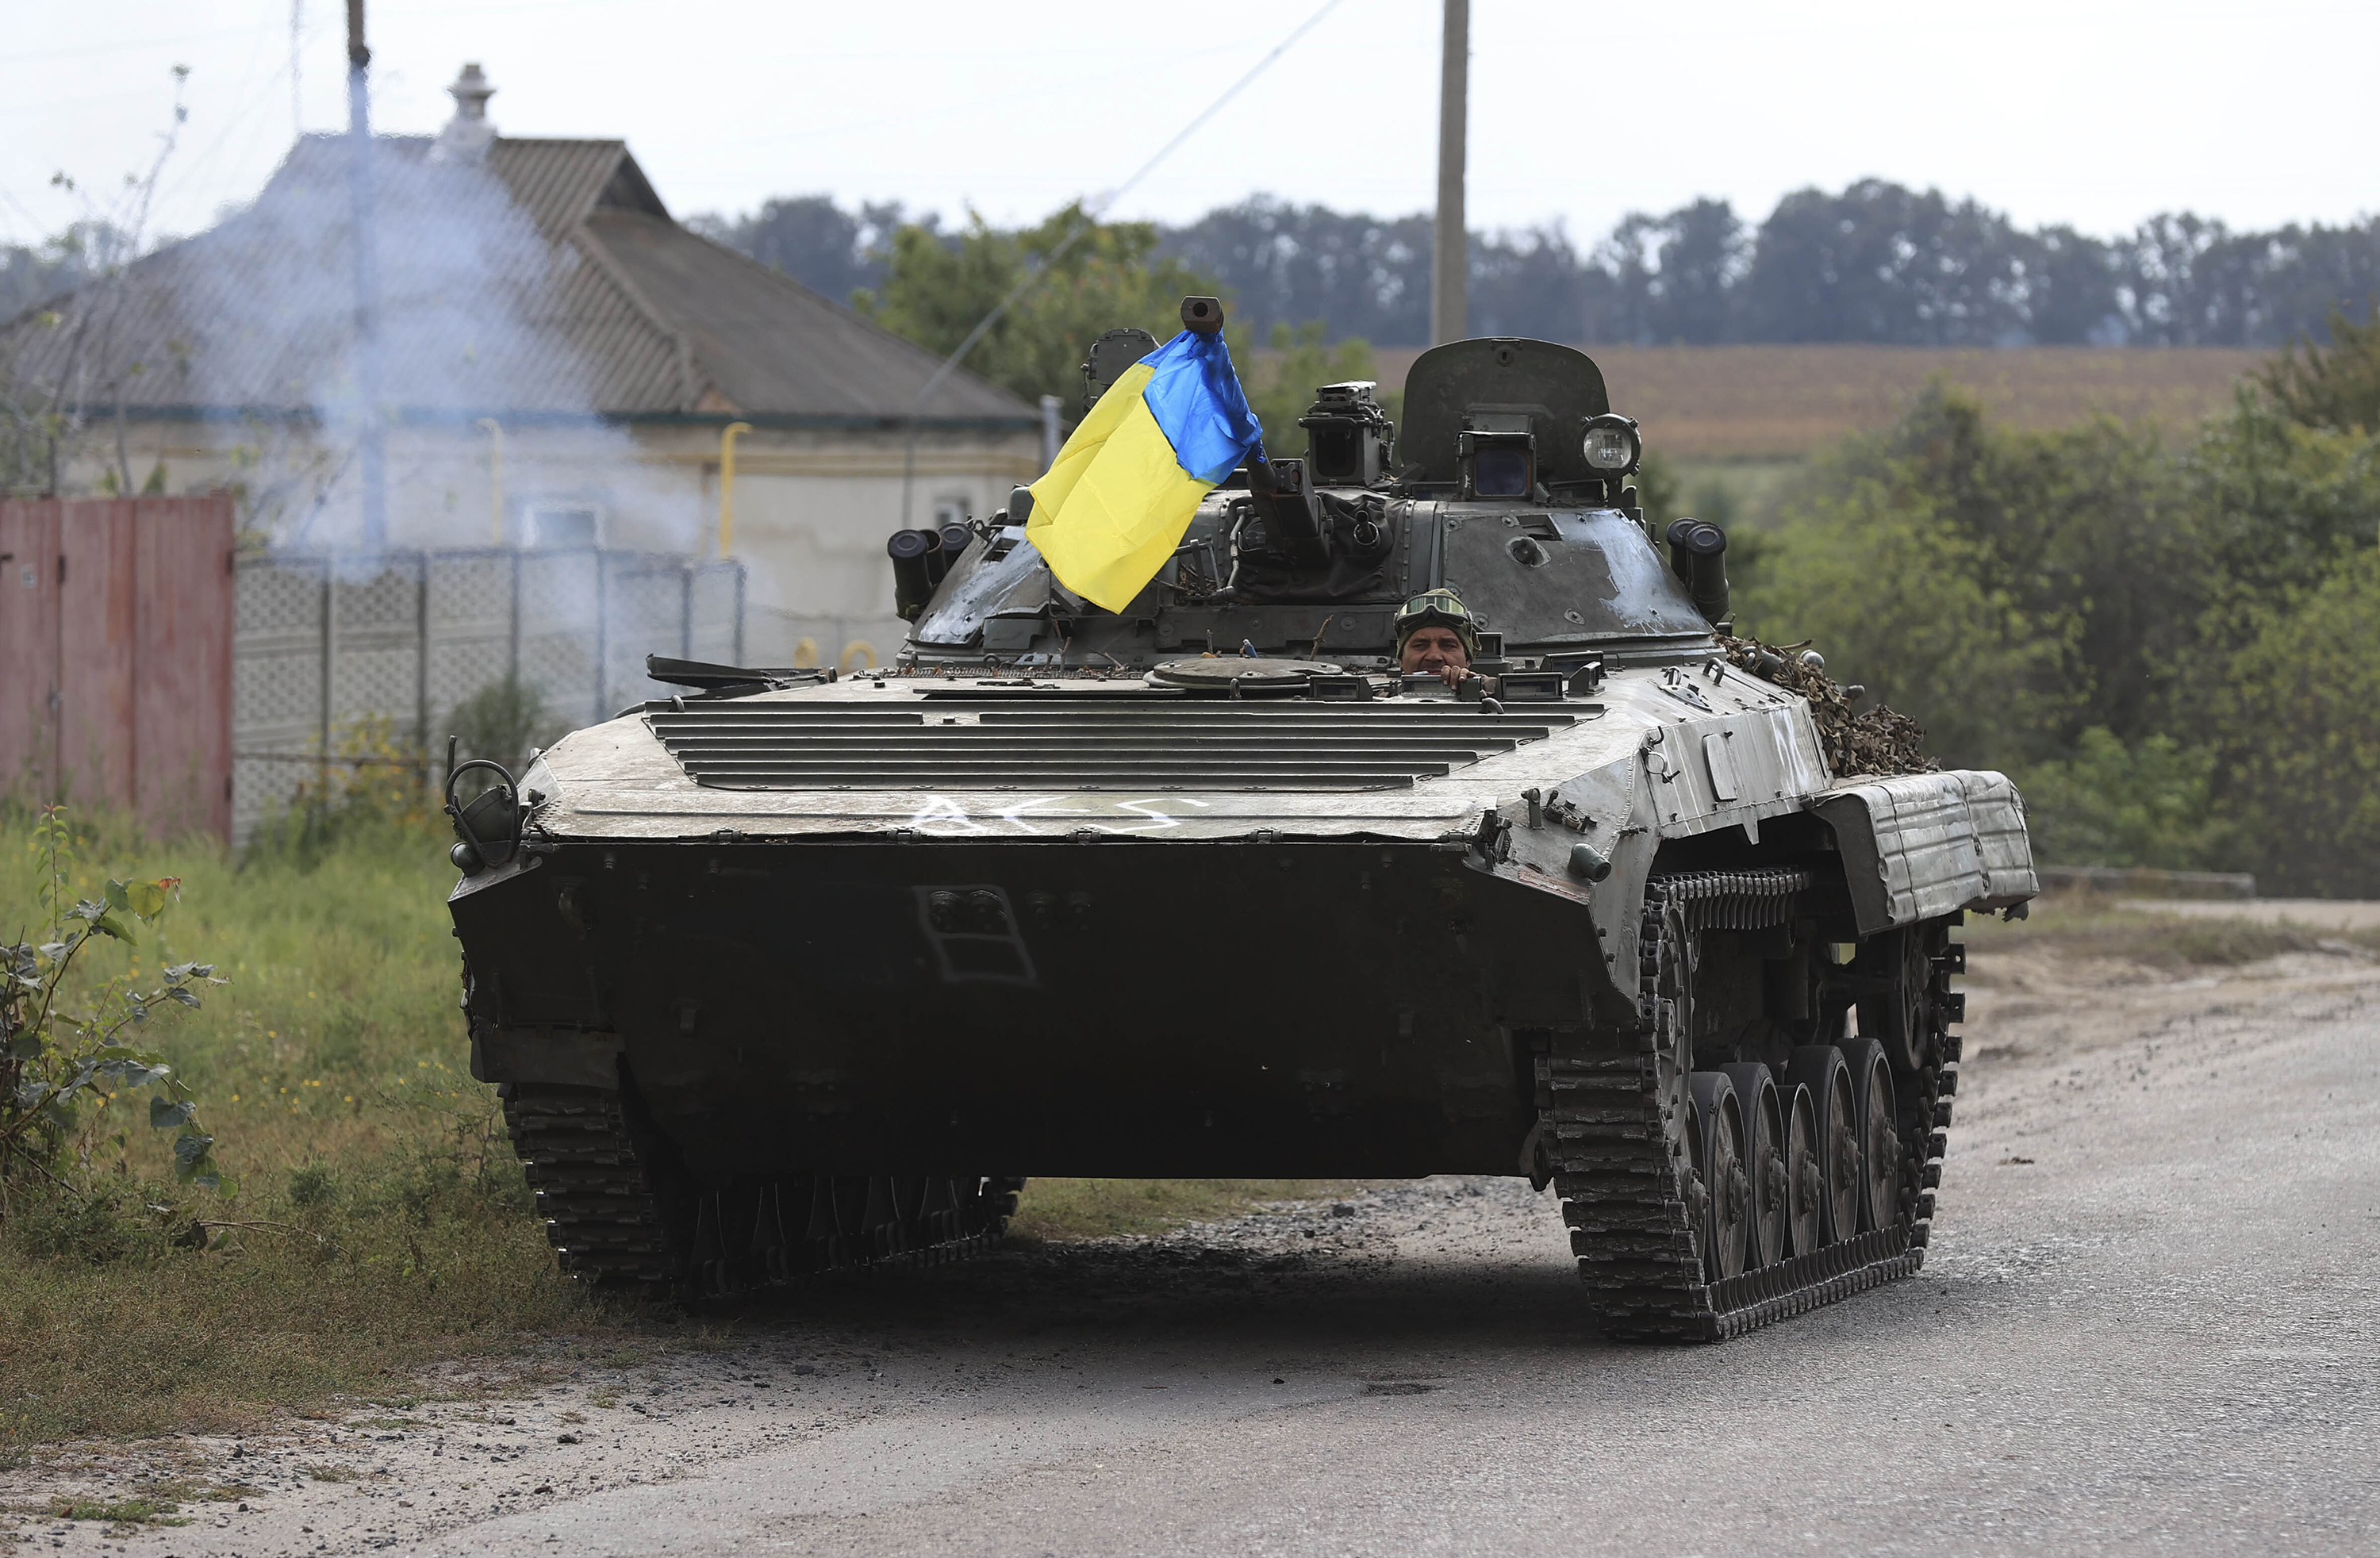 A tank of Ukrainian Army advances to the fronts in the northeastern areas of Kharkiv, Ukraine on September 8.